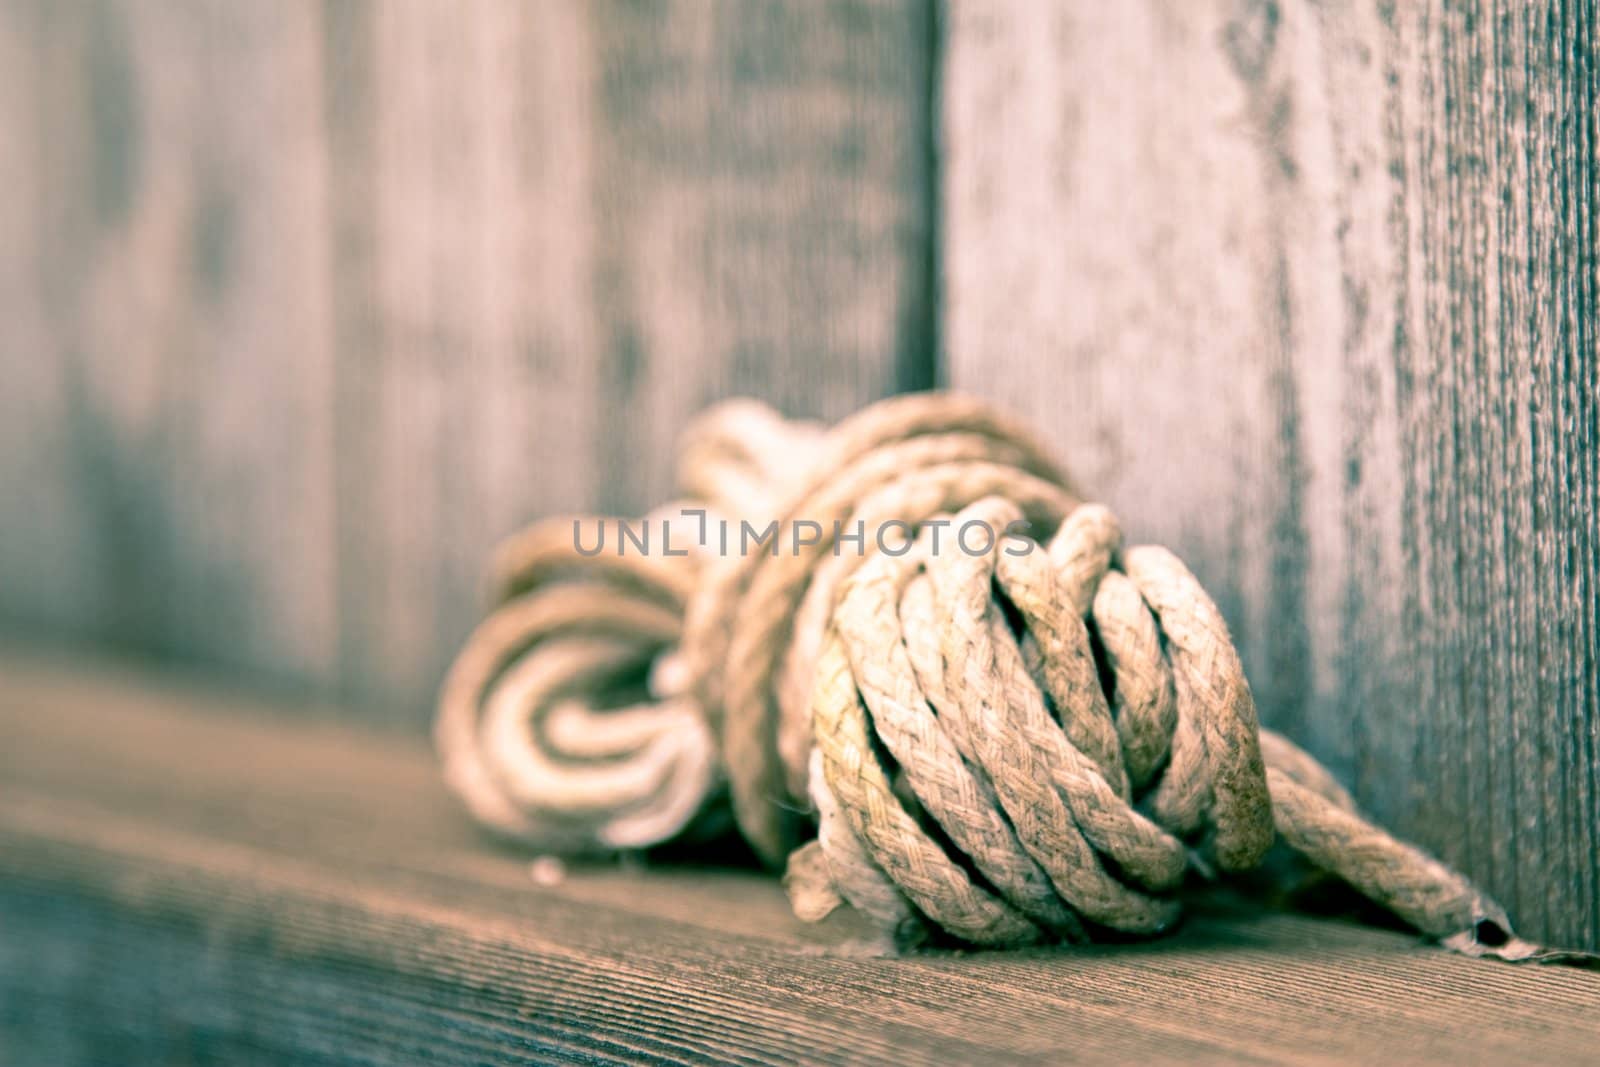 Ball of rope by timscottrom